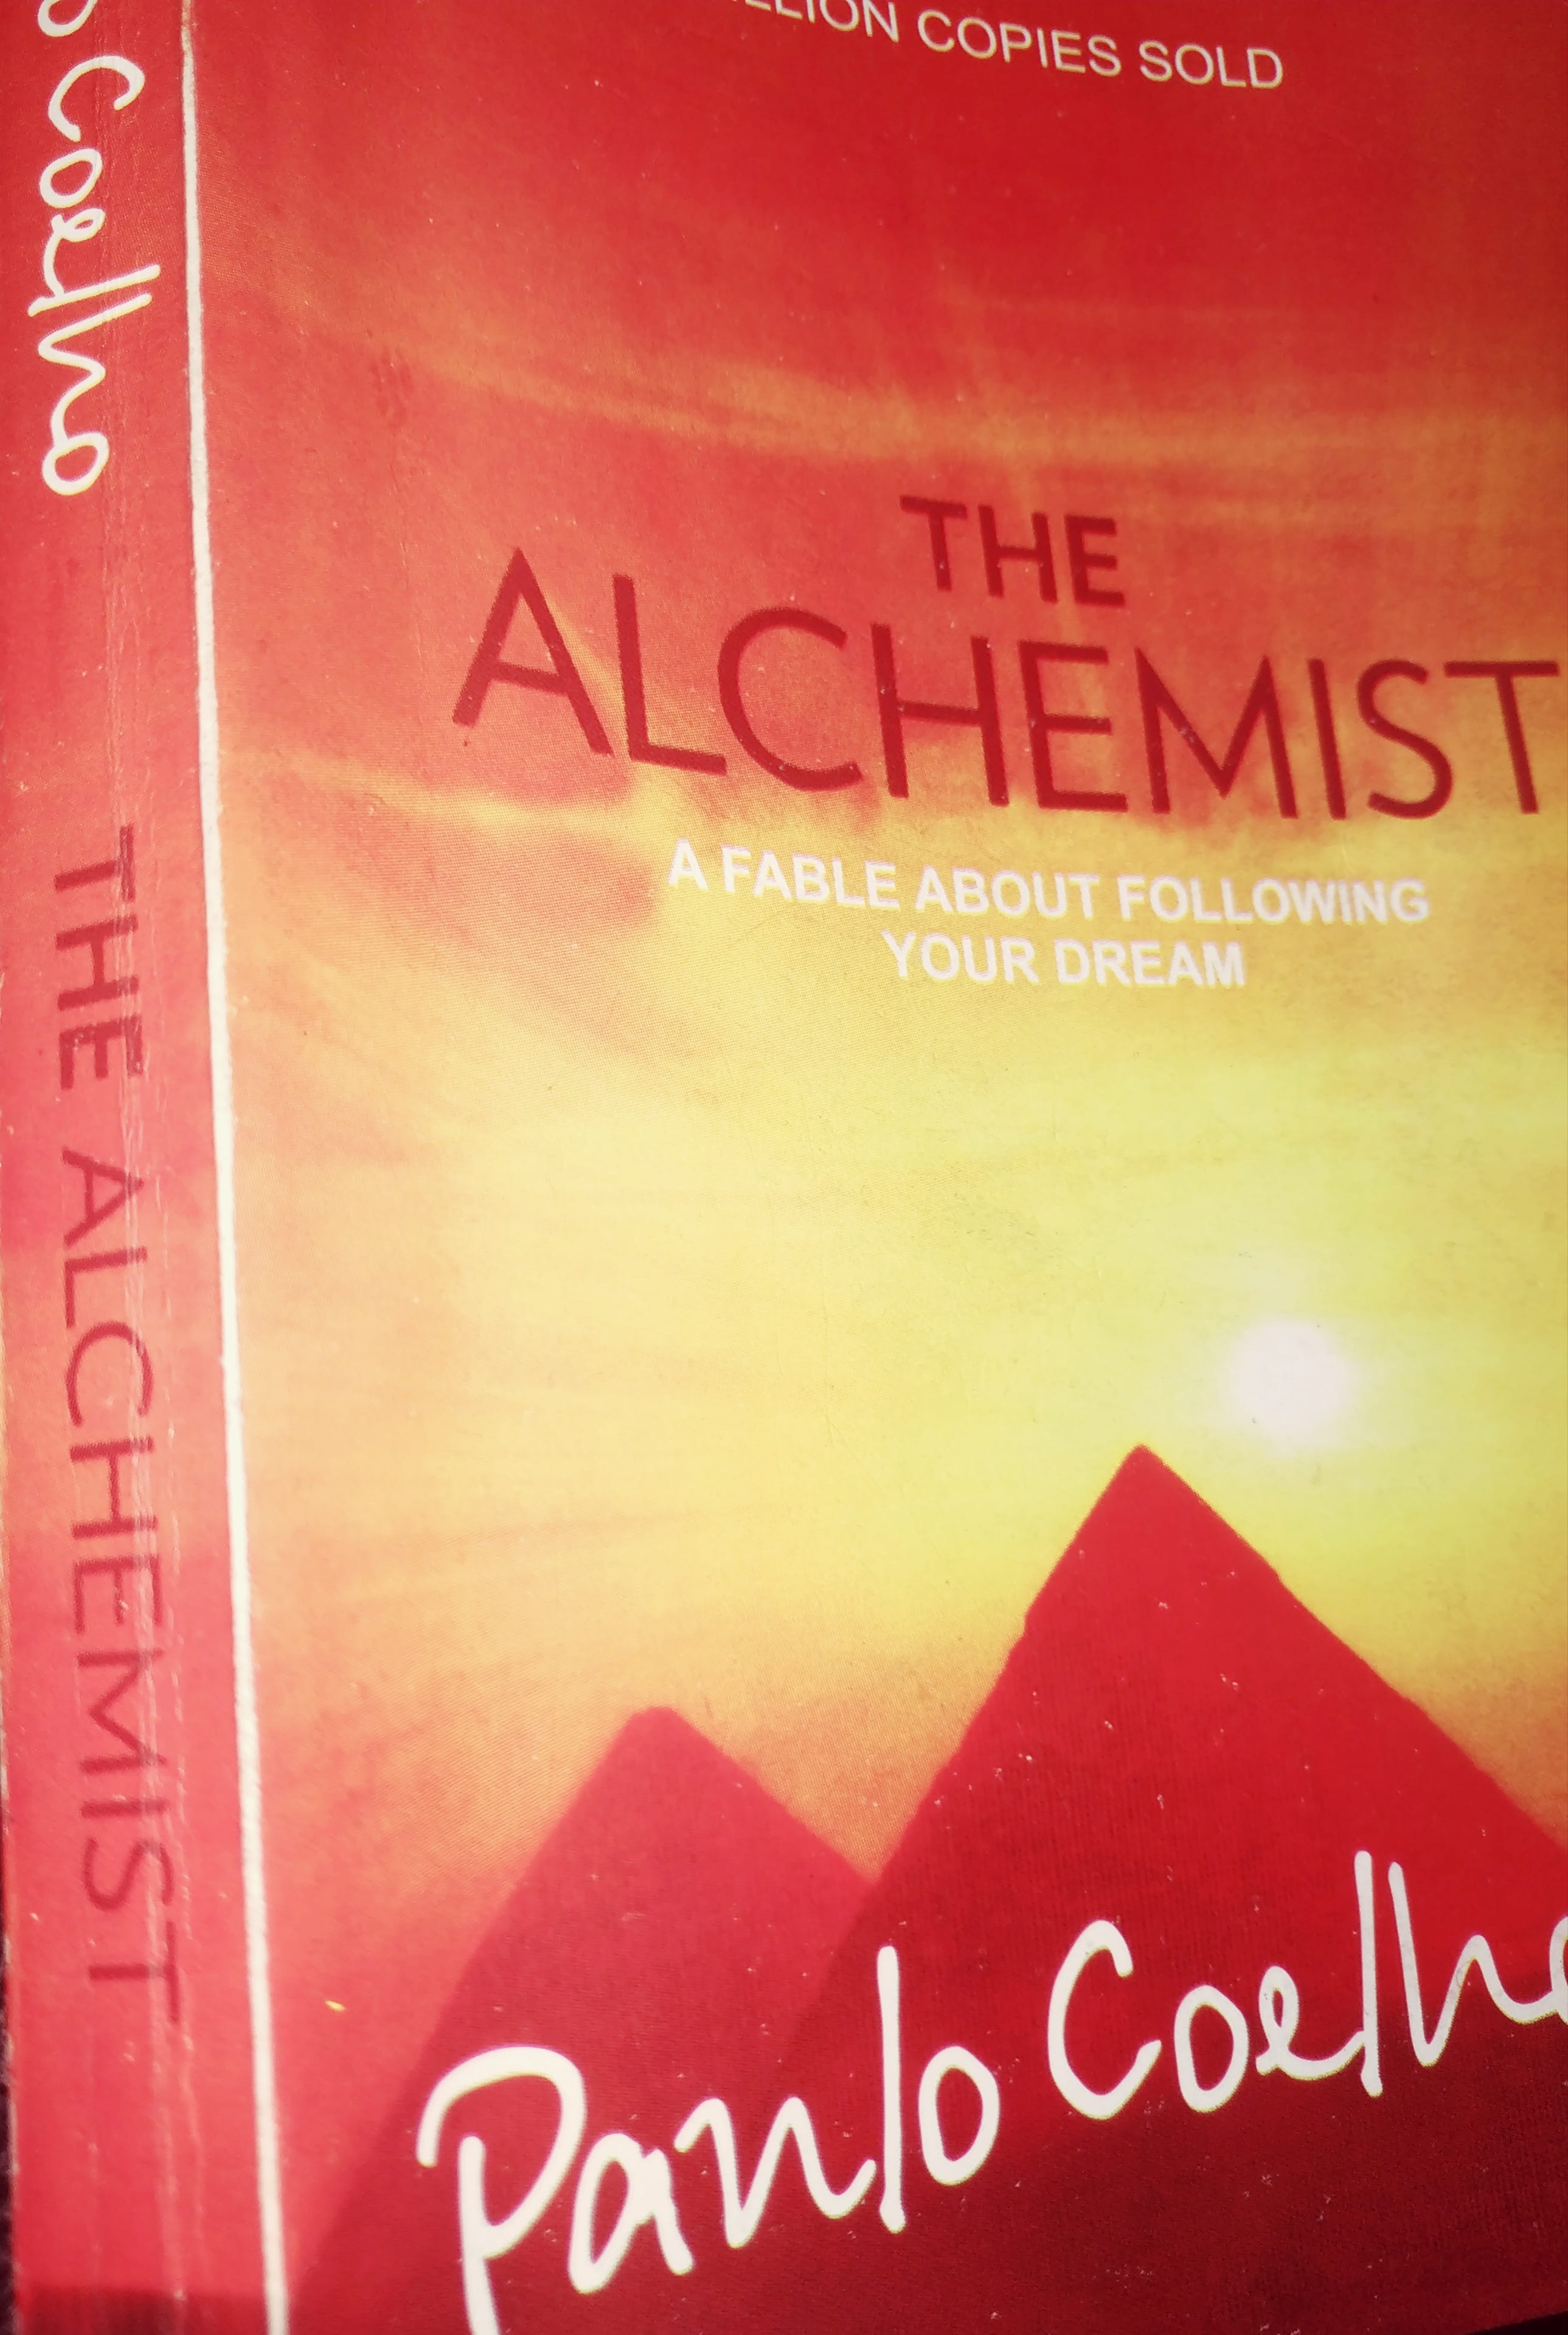 Book Review Why The Book The Alchemist Doesn T Change My Life Medium